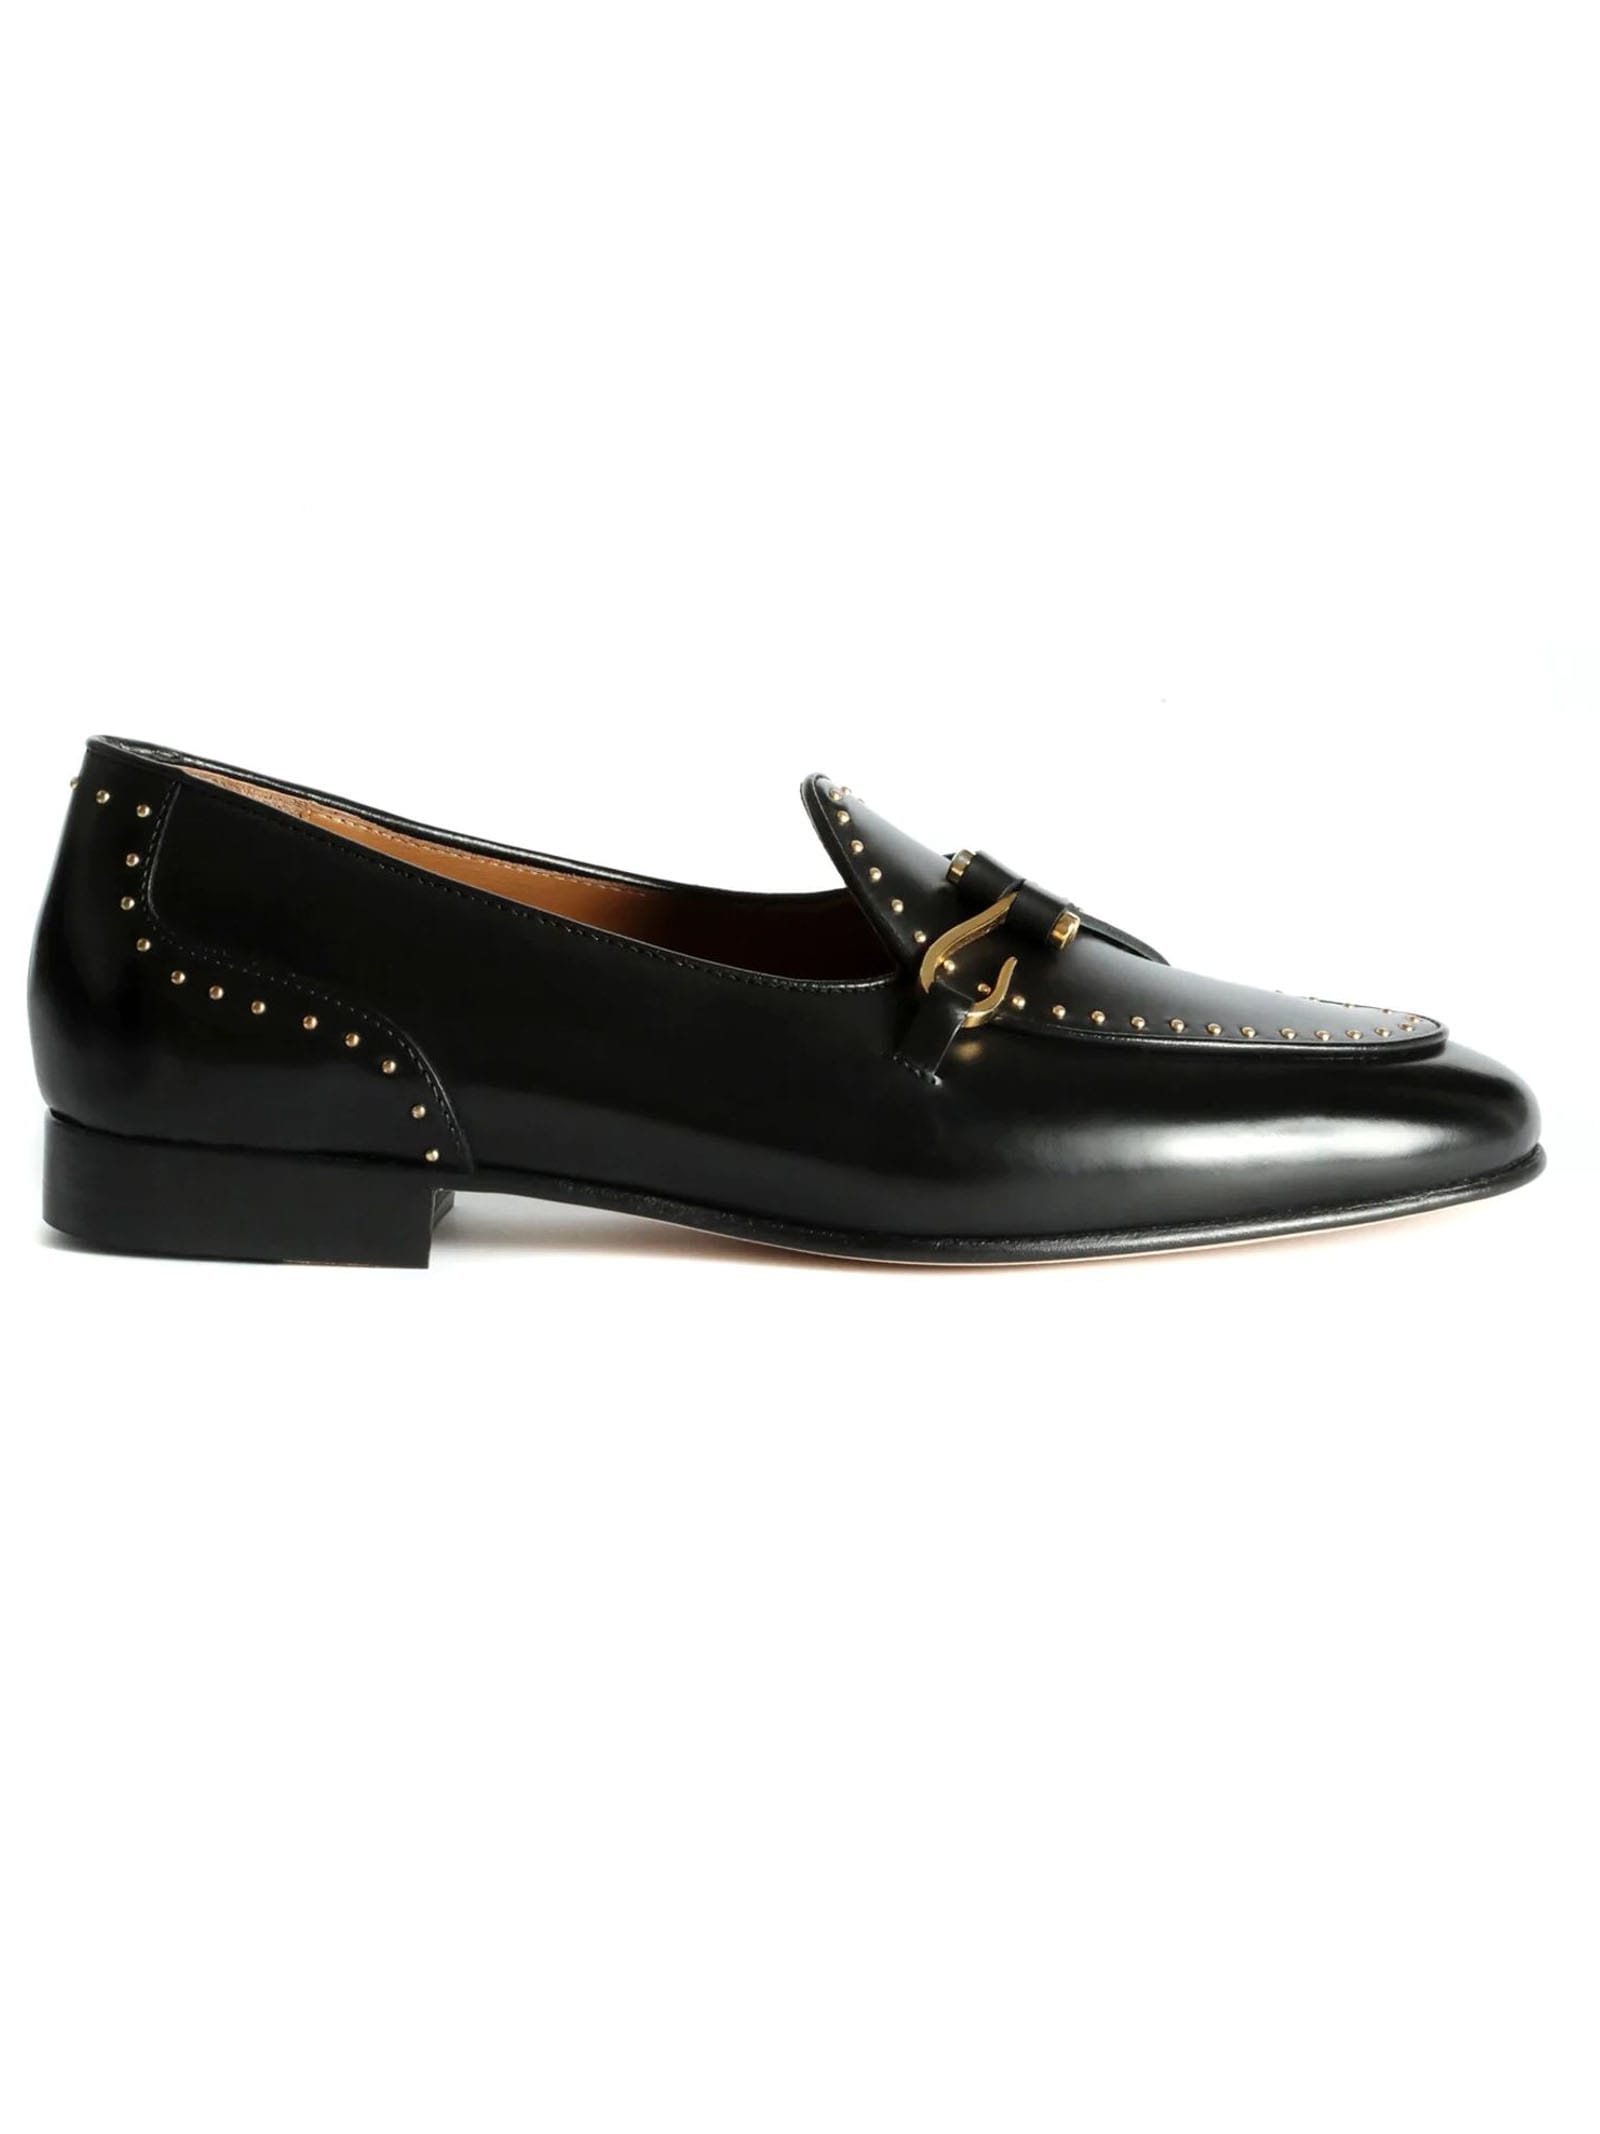 Black Calf Leather Comporta Loafers